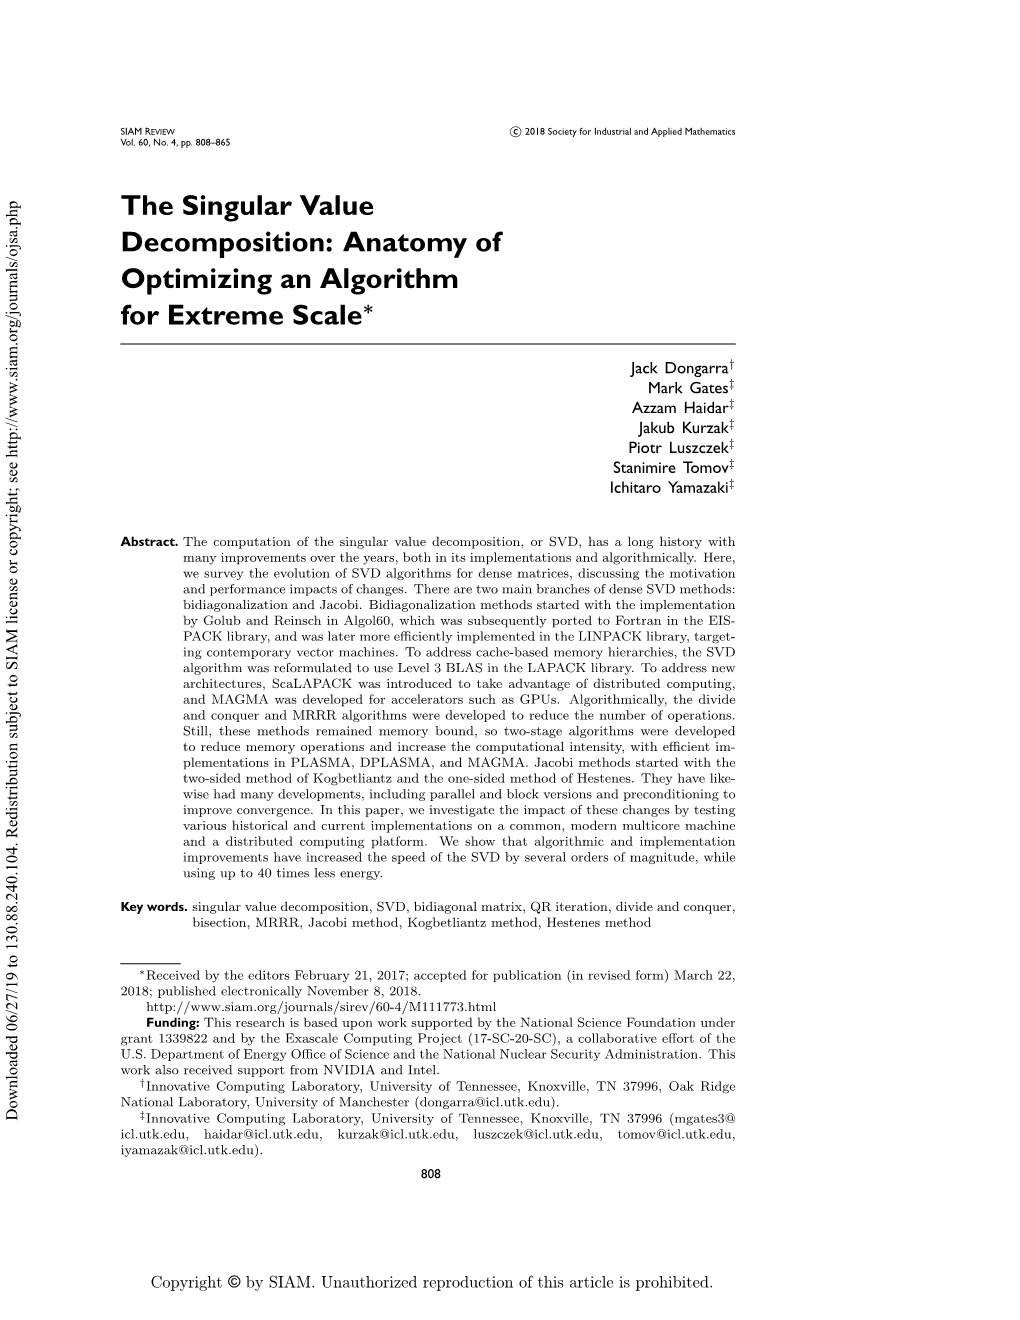 The Singular Value Decomposition, Or SVD, Has a Long History with Many Improvements Over the Years, Both in Its Implementations and Algorithmically